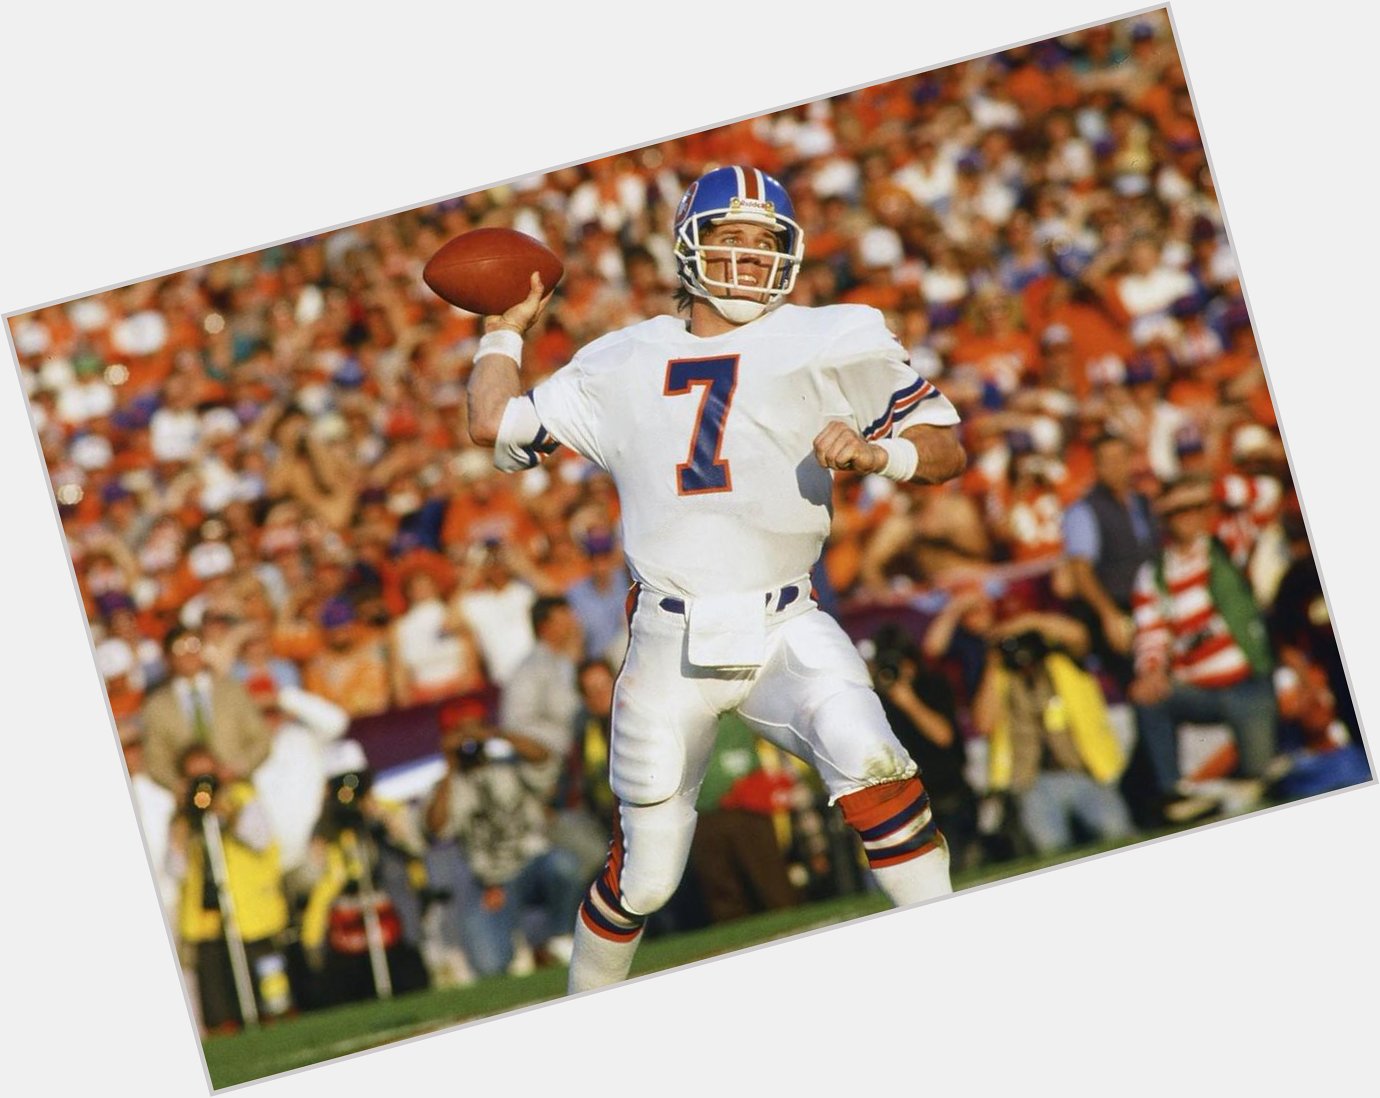 Happy Birthday to the greatest of all time John Elway ( 